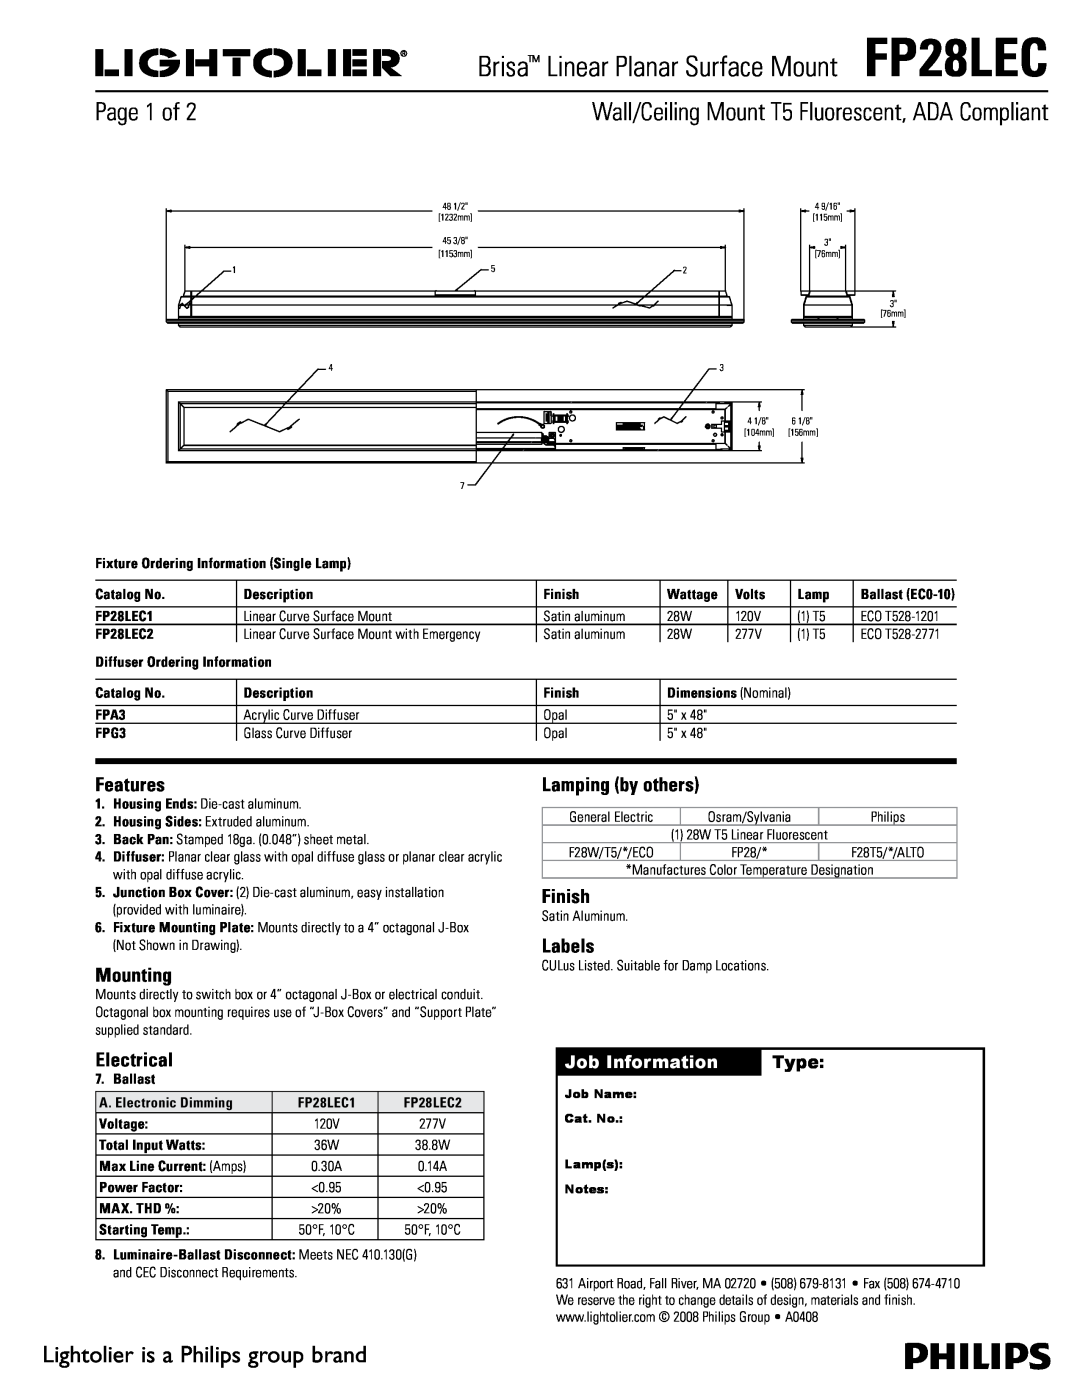 Lightolier dimensions Brisa Linear Planar Surface MountFP28LEC, Page  of, Lightolier is a Philips group brand, Type 